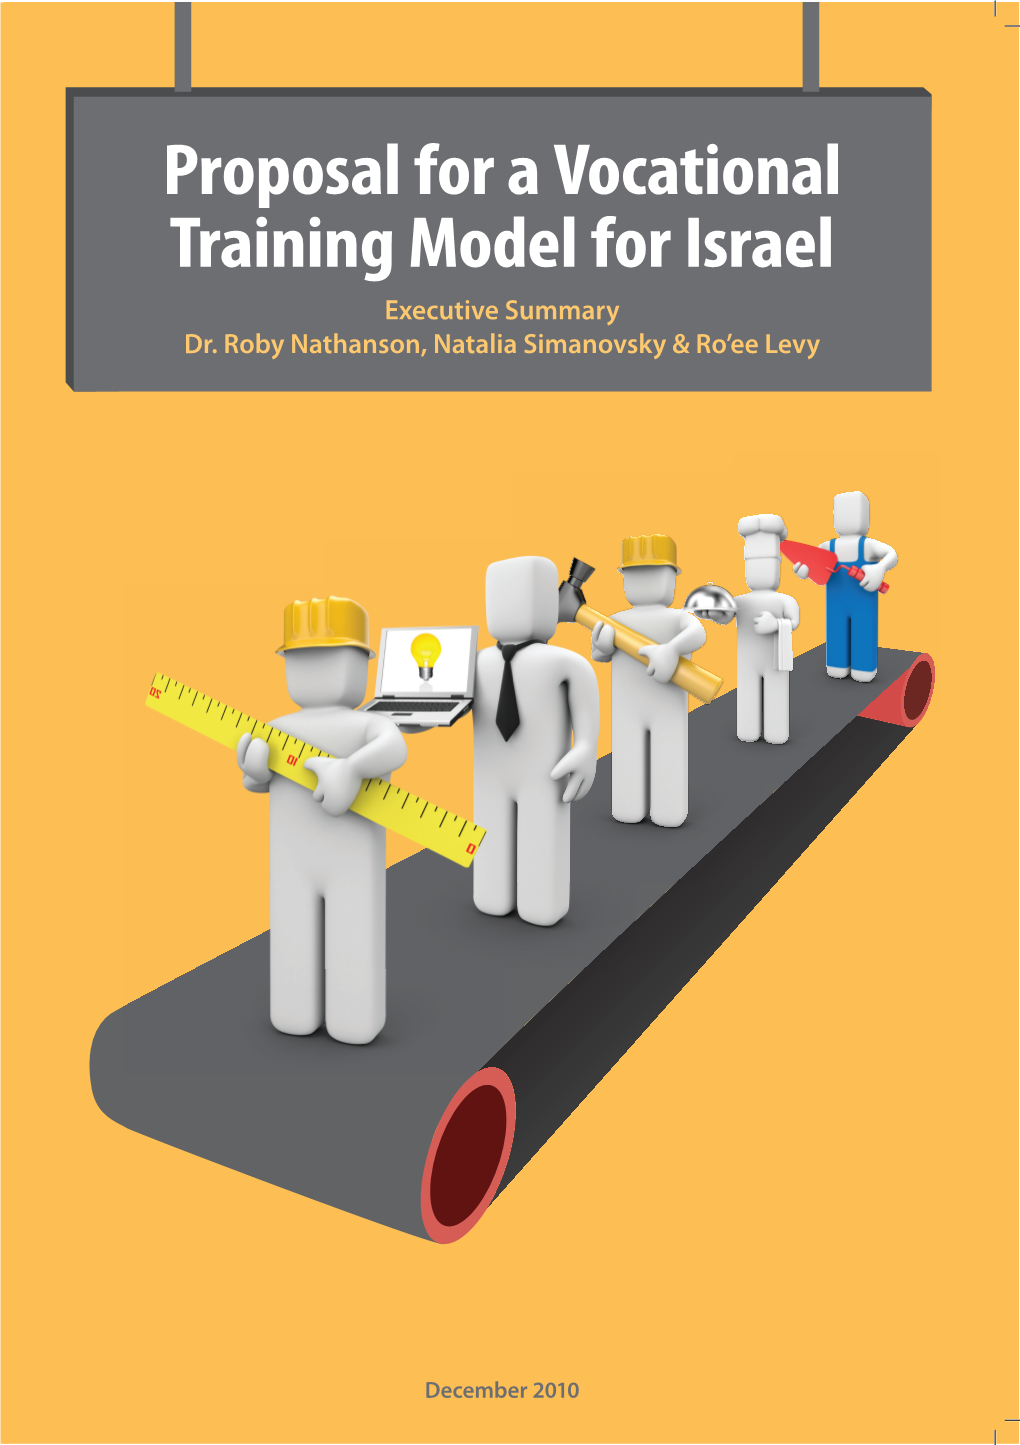 Proposal for a Vocational Training Model for Israel